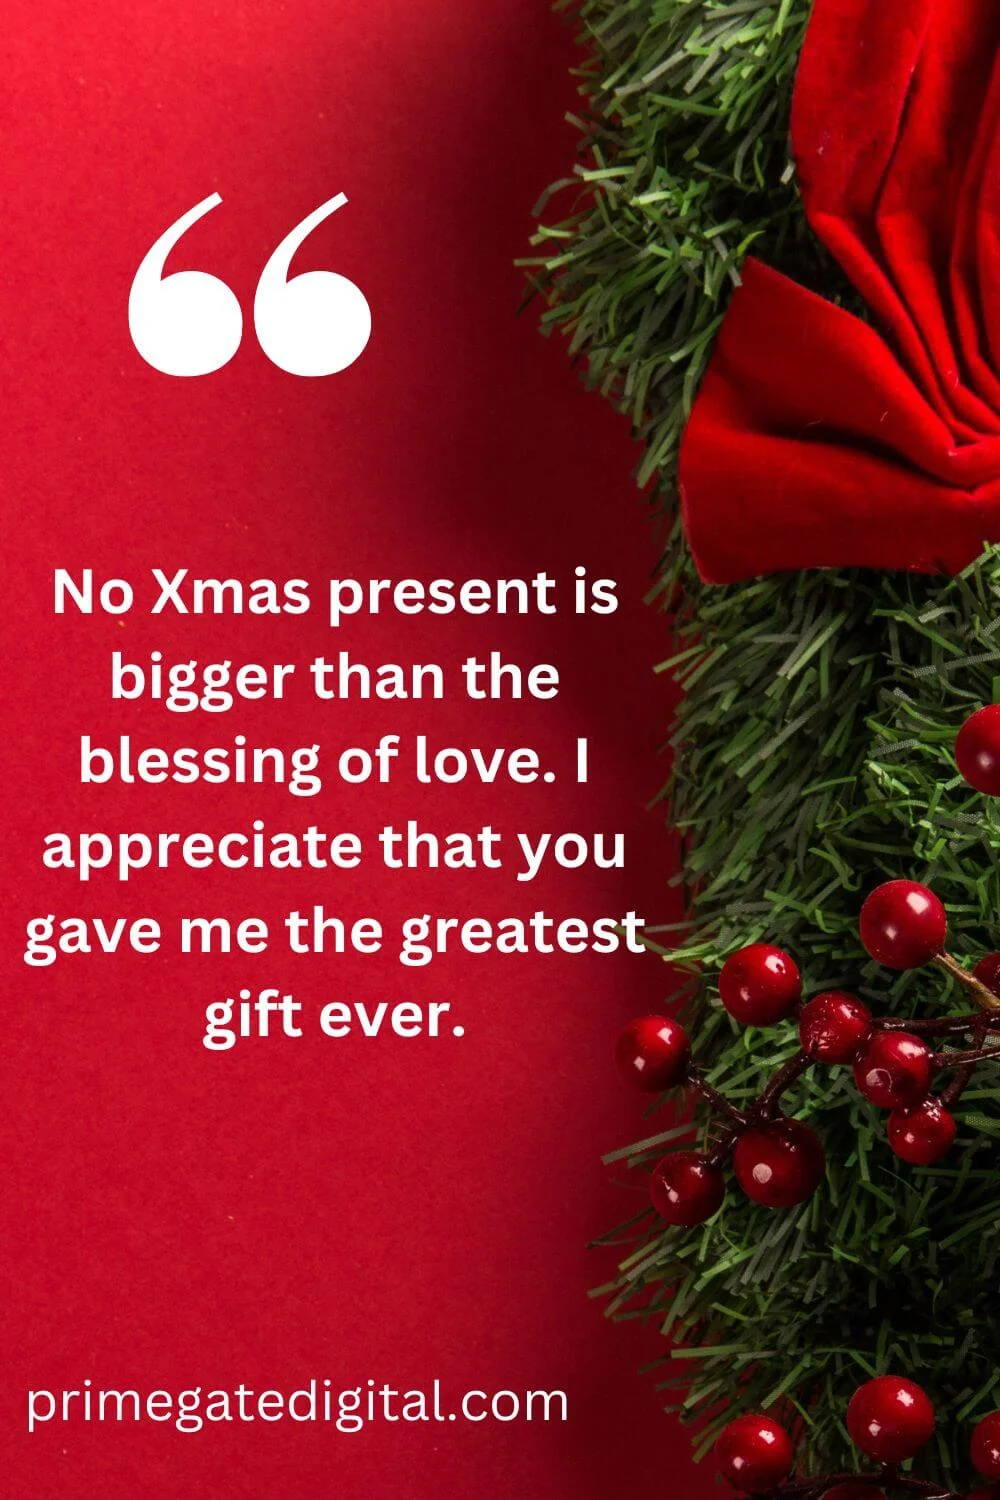 Loverly Christmas quote